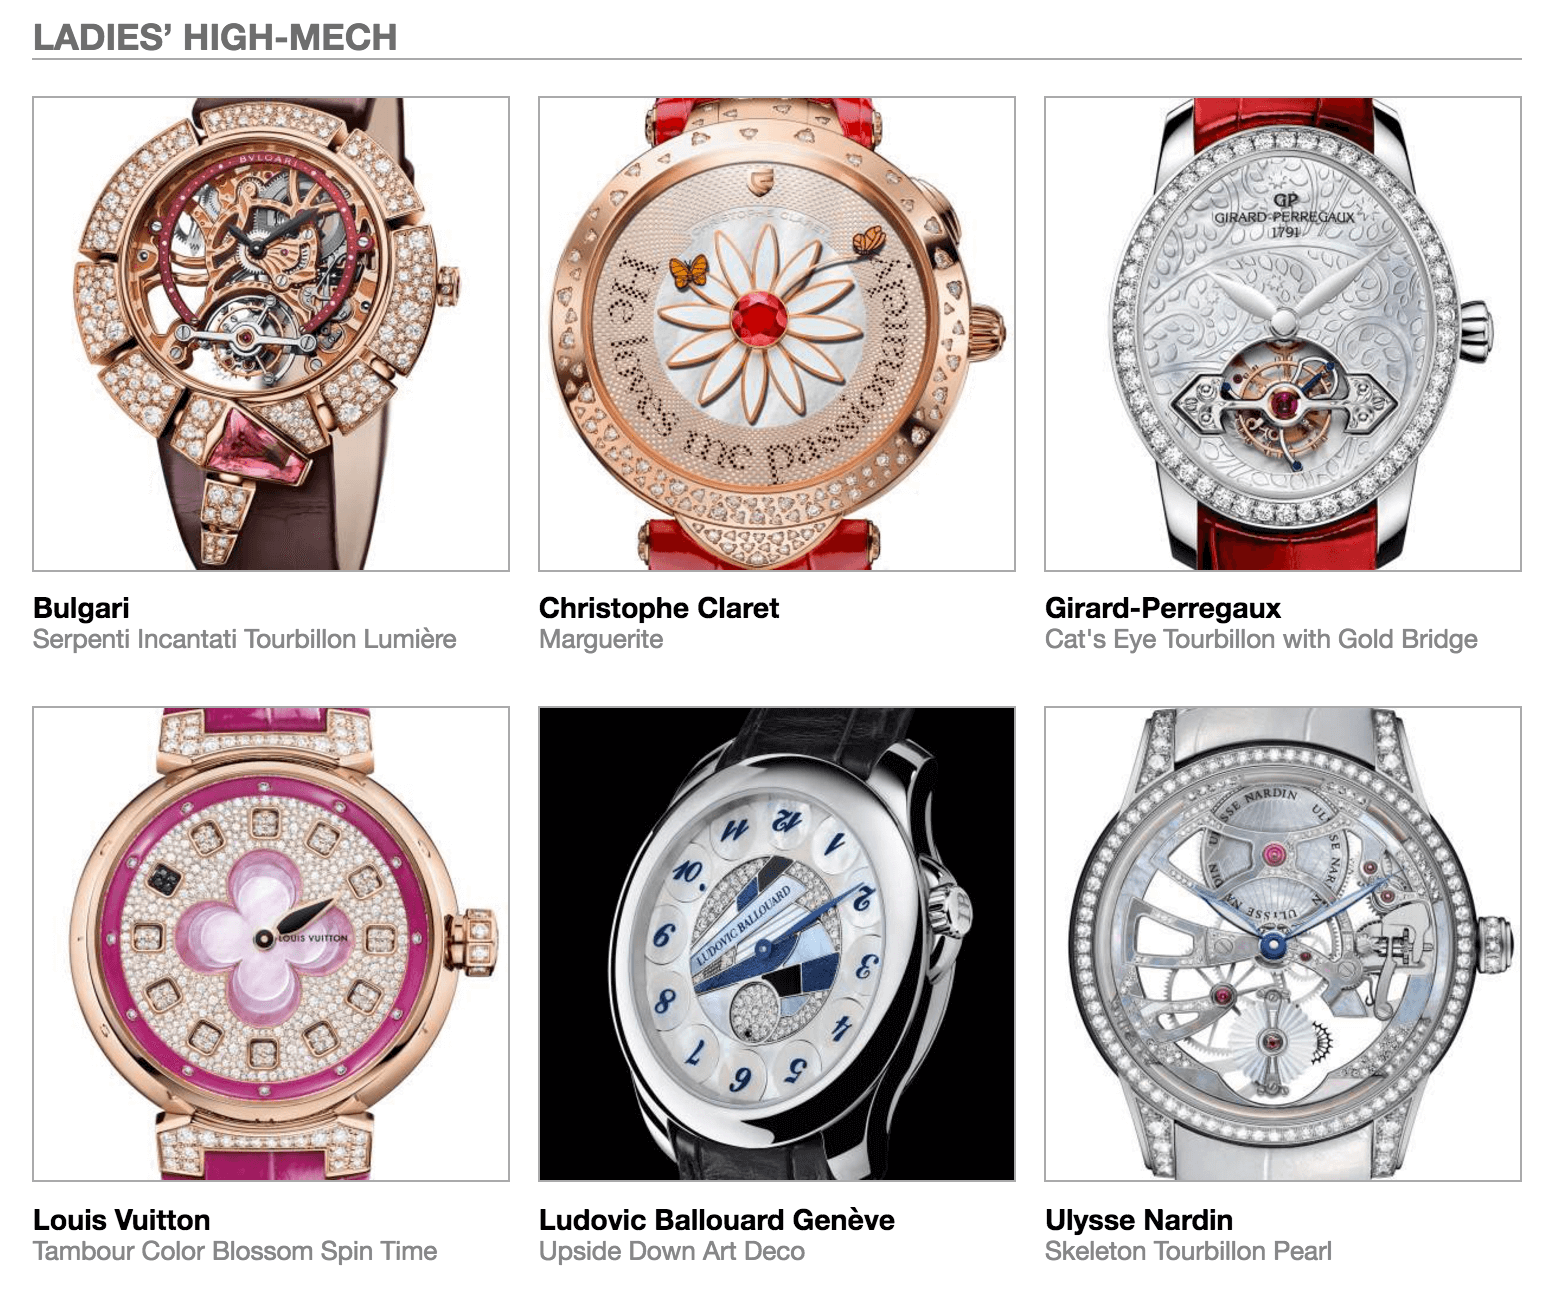 Pre-selected Ladies' High-Mech watches in the 2016 GPHG